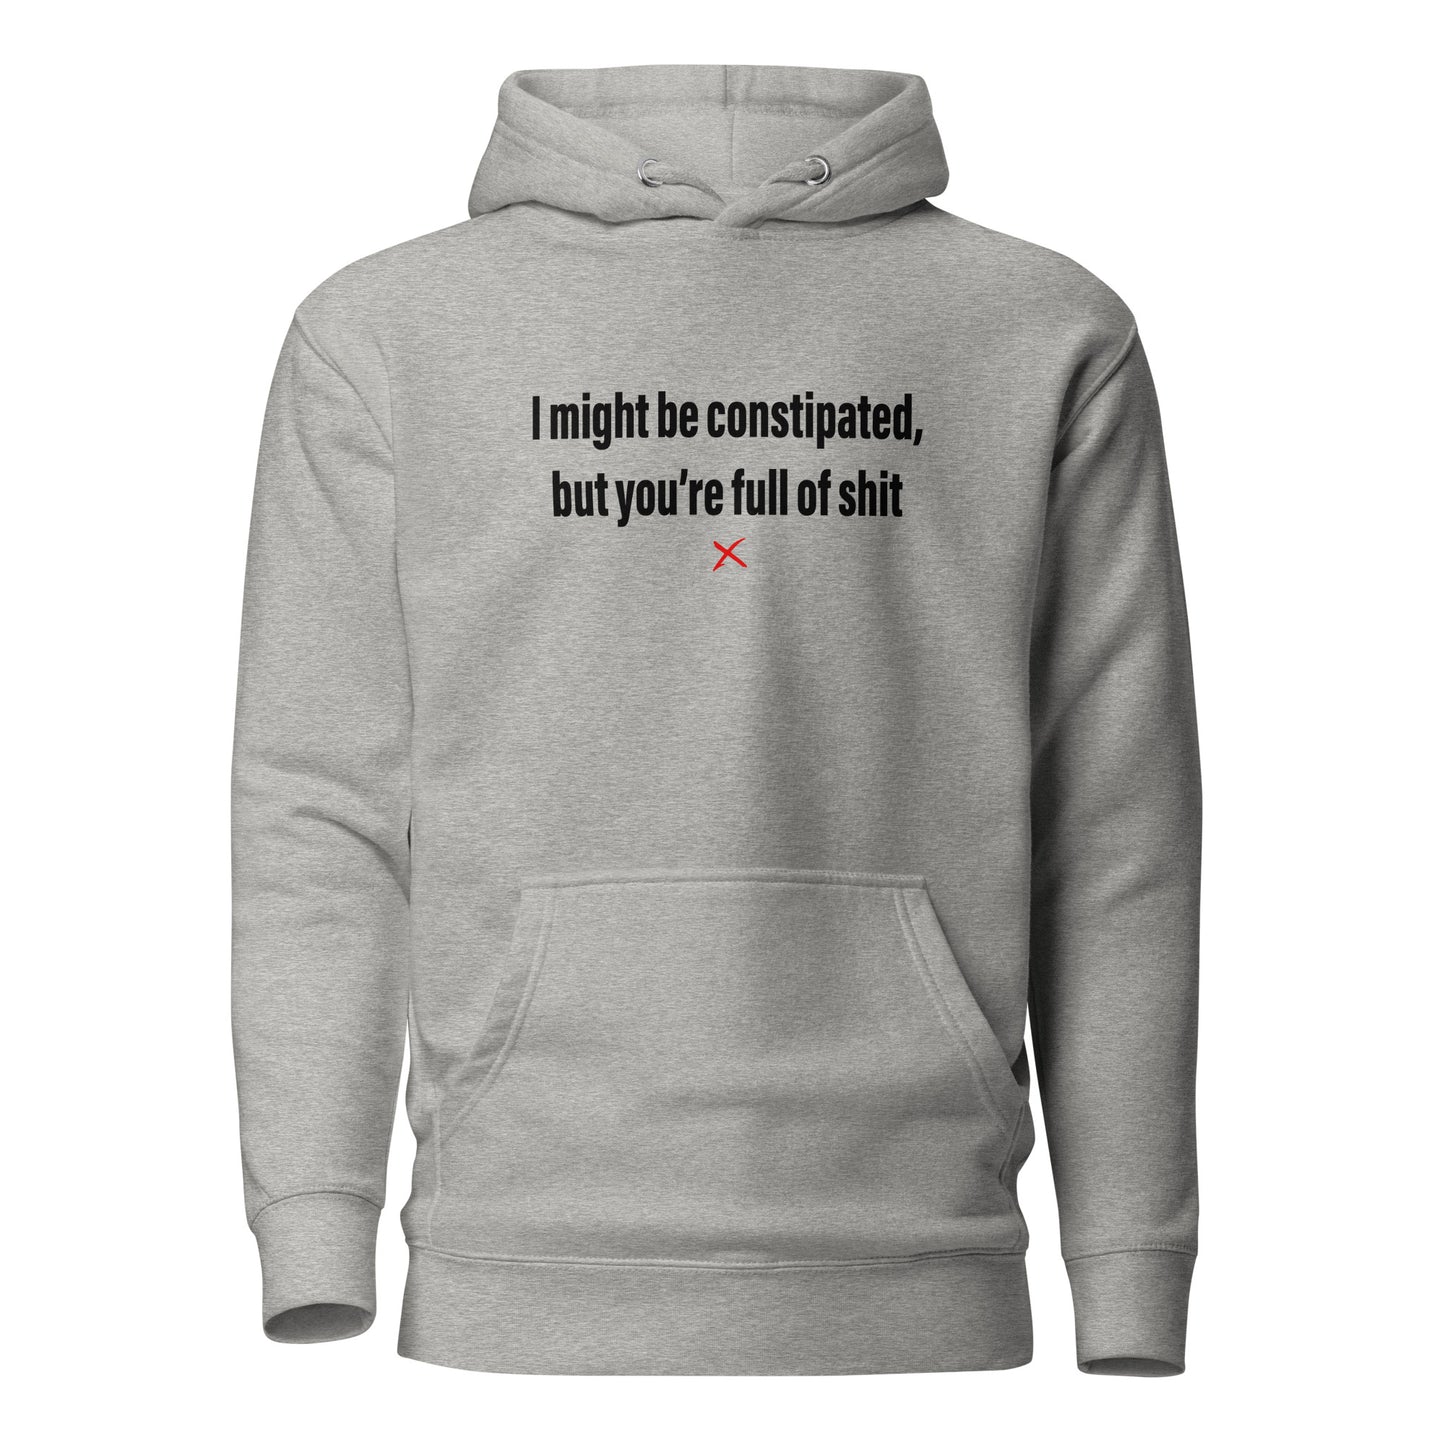 I might be constipated, but you're full of shit - Hoodie